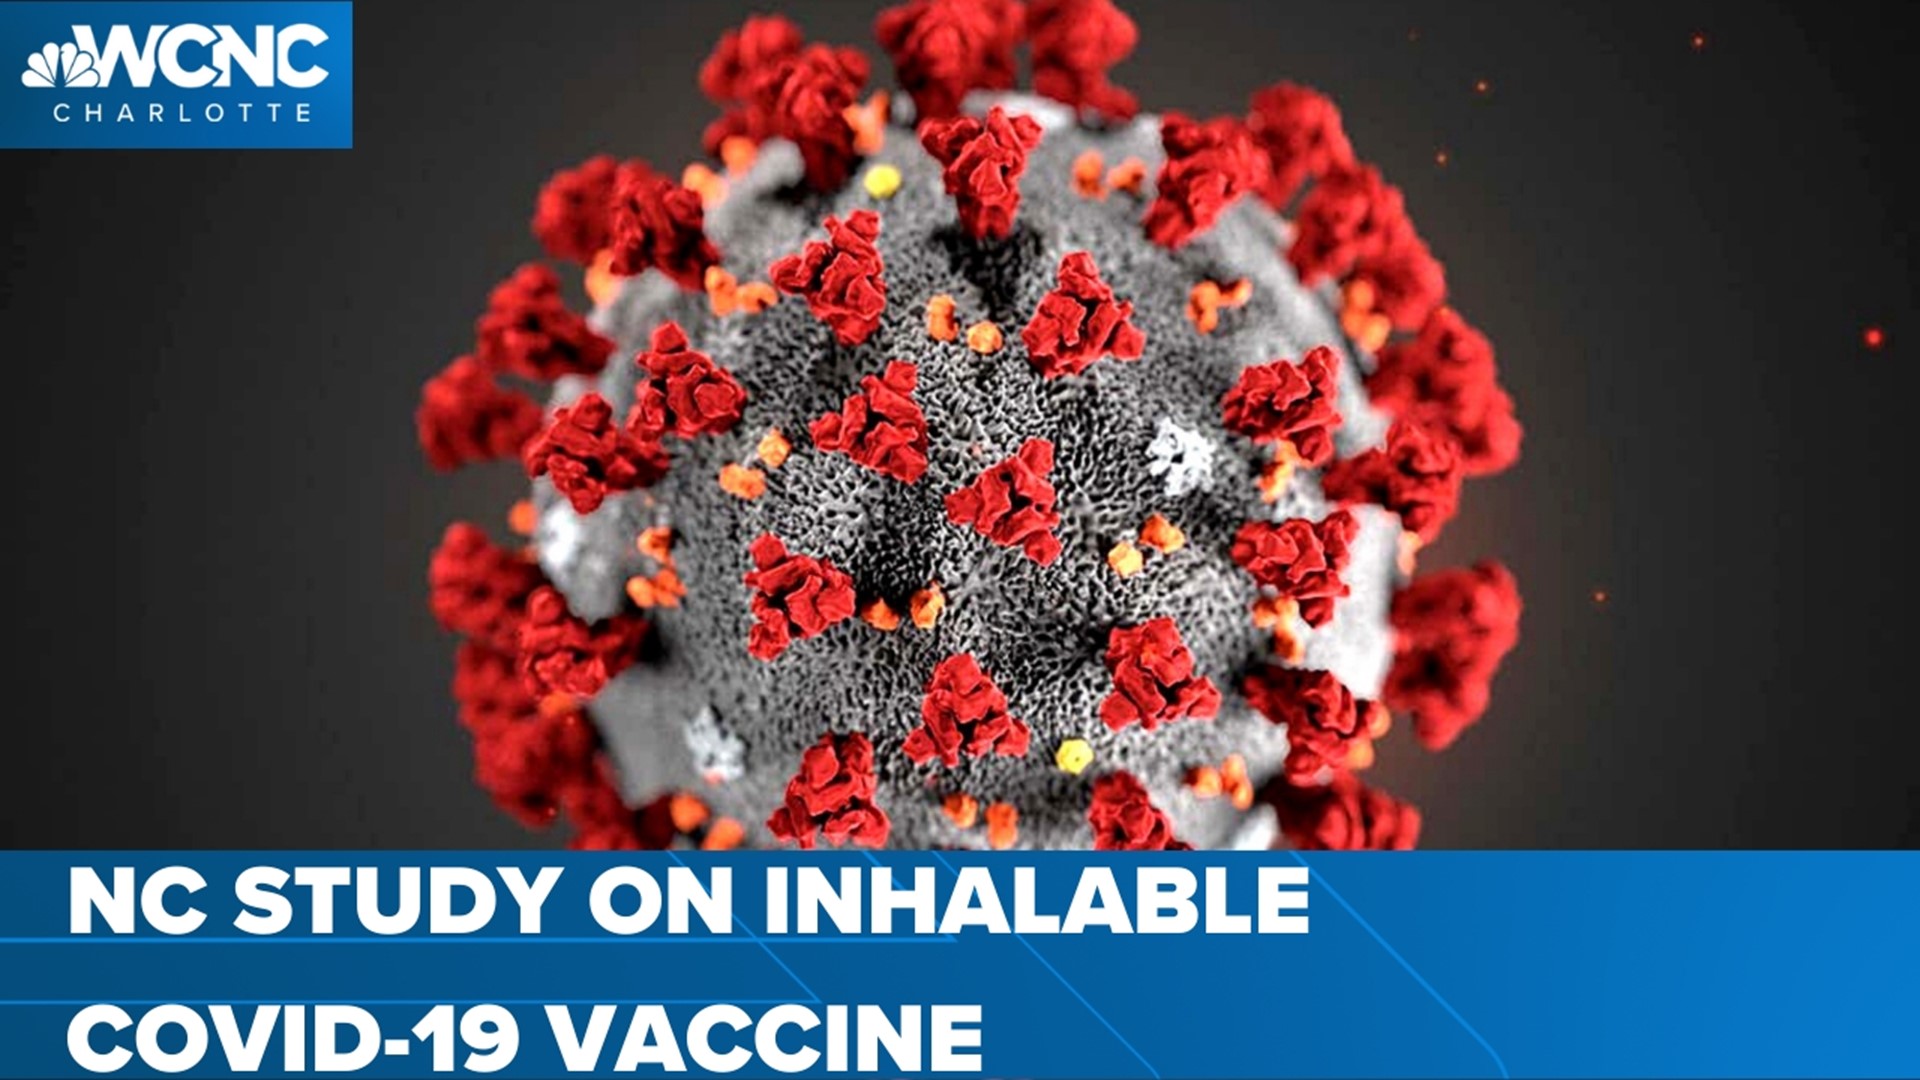 Researchers are looking to administer a vaccine through an inhaler. So far, studies have promising results in rodents.